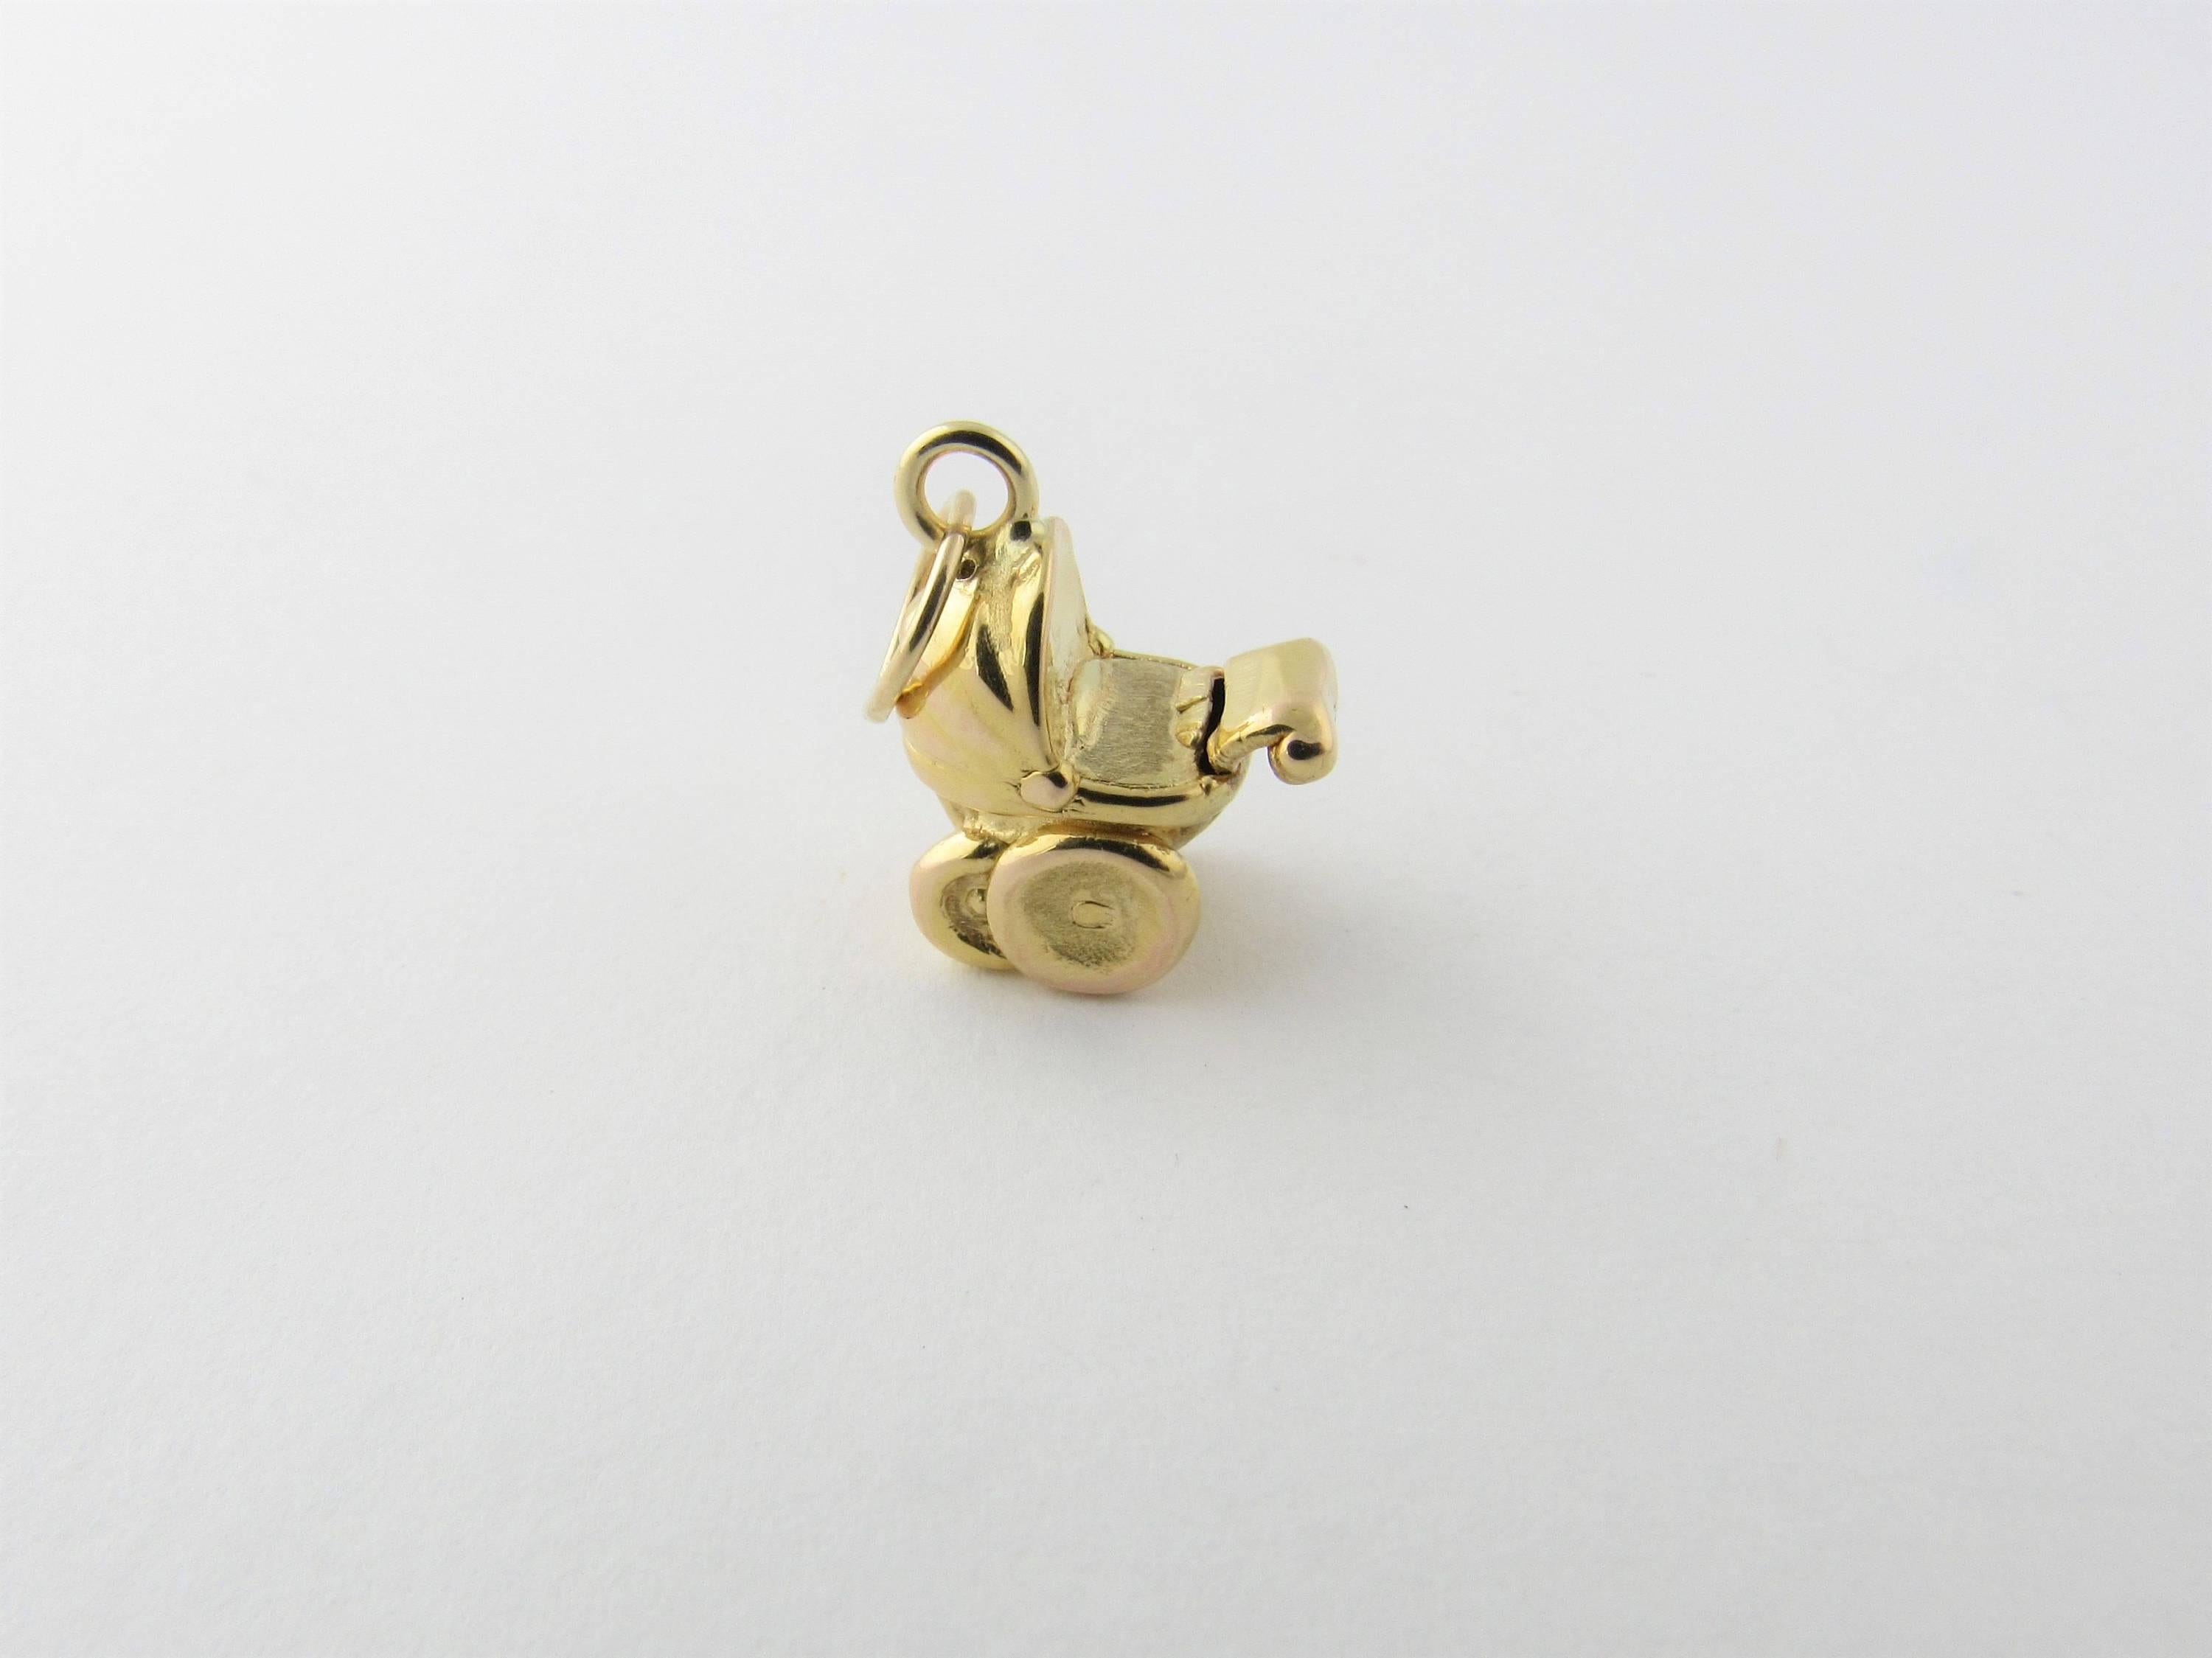 Vintage 14 Karat Yellow Gold Baby Pram Charm- 
Perfect gift for the new mom! 
This 3D charm depicts a miniature baby pram in beautifully detailed 14K yellow gold. 
Size:    13.5 mm x  12 mm (actual charm) 
Weight: 0.7 dwt. /   1.1 gr. 
Hallmark: 14K